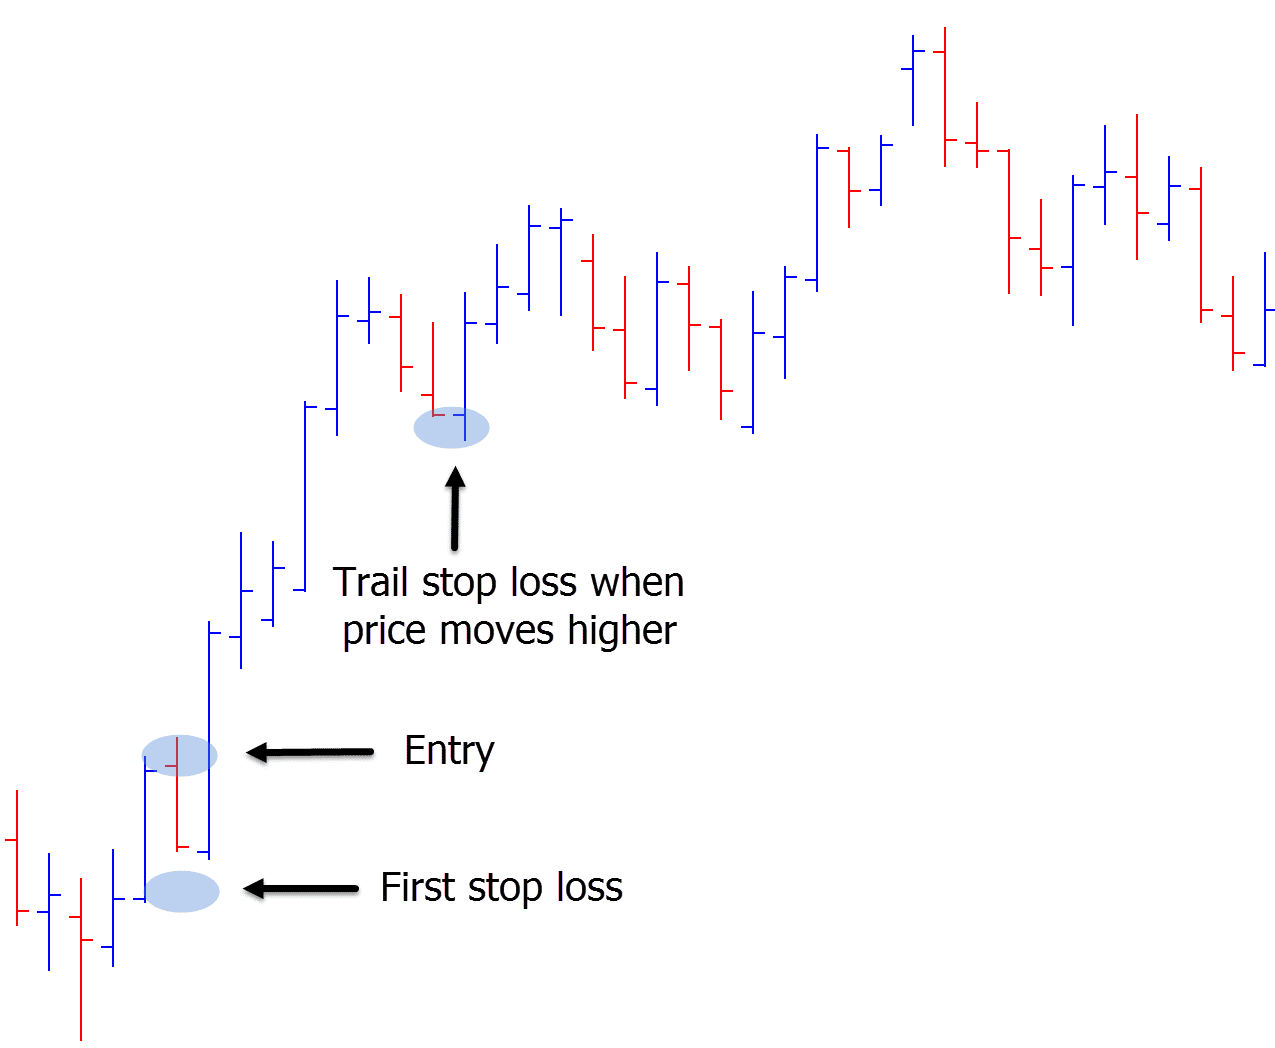 trail stop loss example